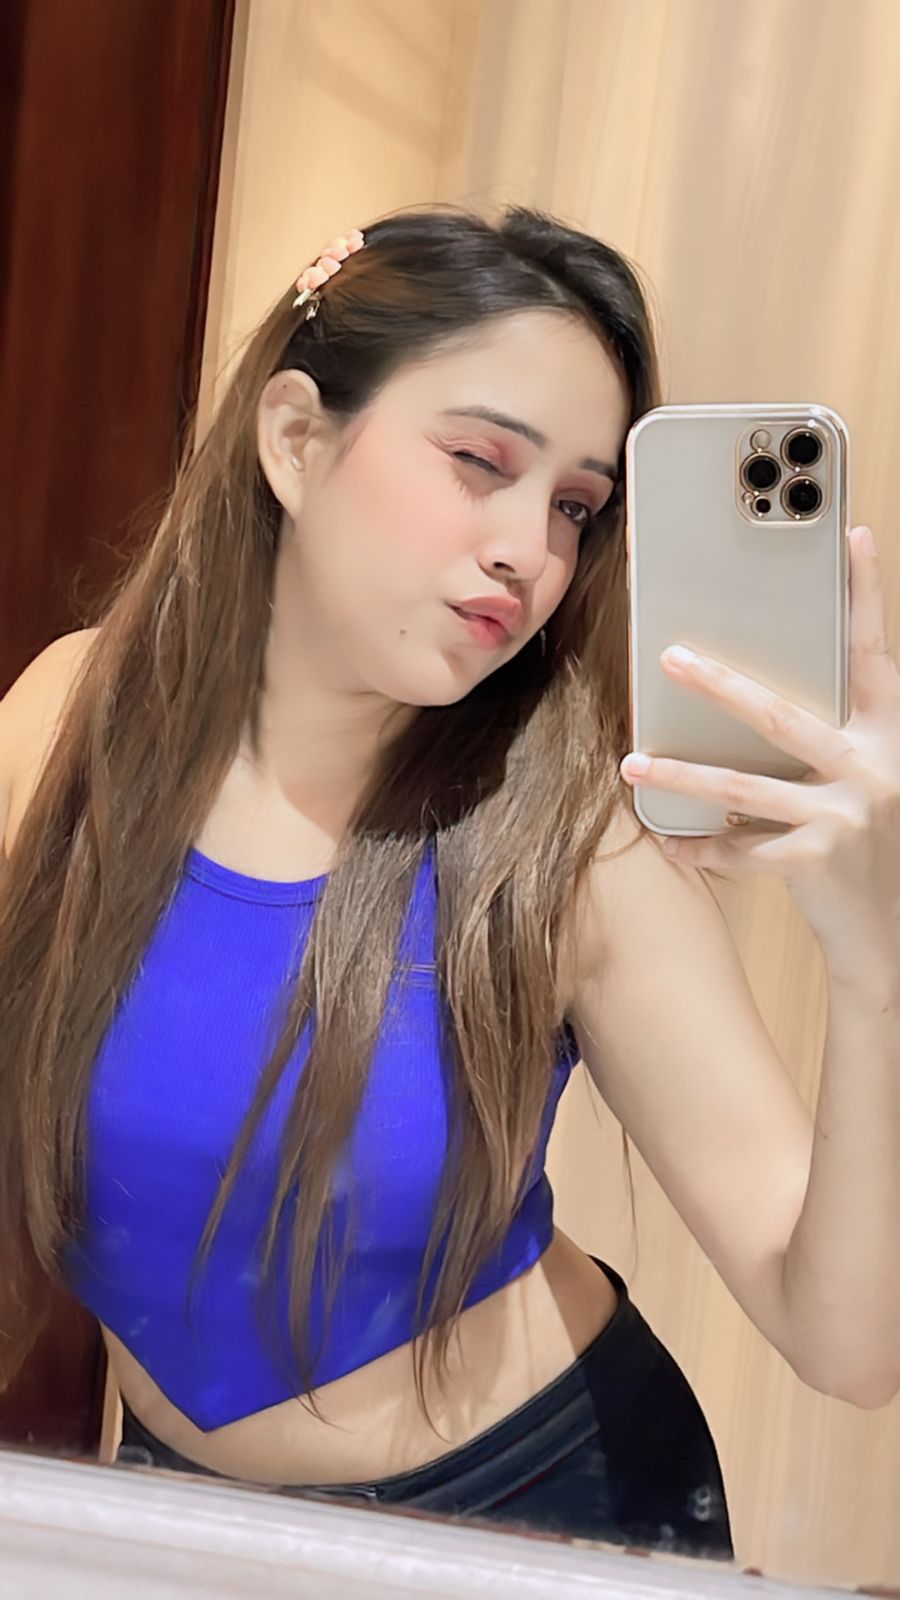 Ujjain 24/7 top best low price call girls sex service available 100% sefa and securejjfy